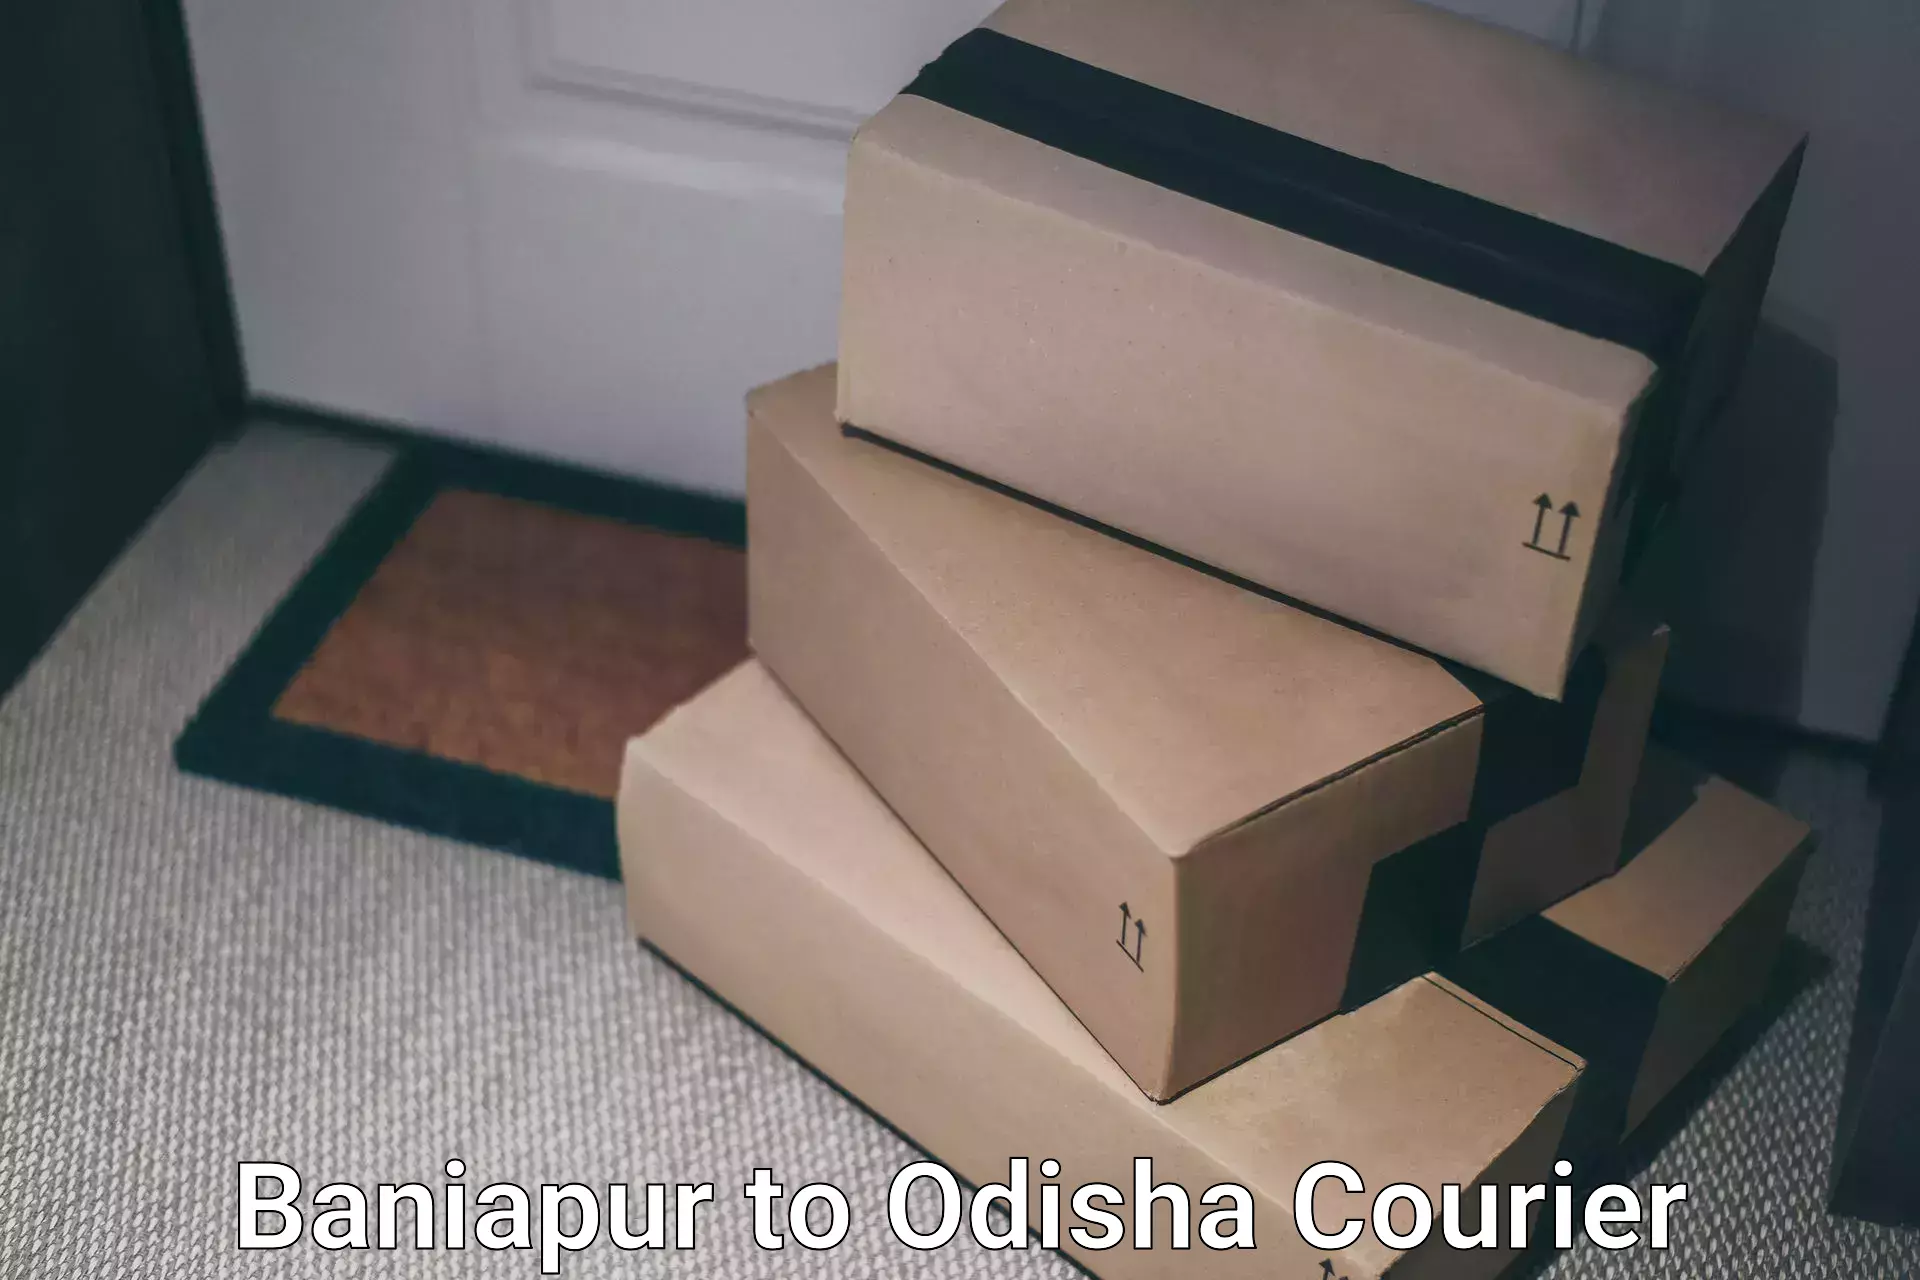 24-hour courier service in Baniapur to Balinga